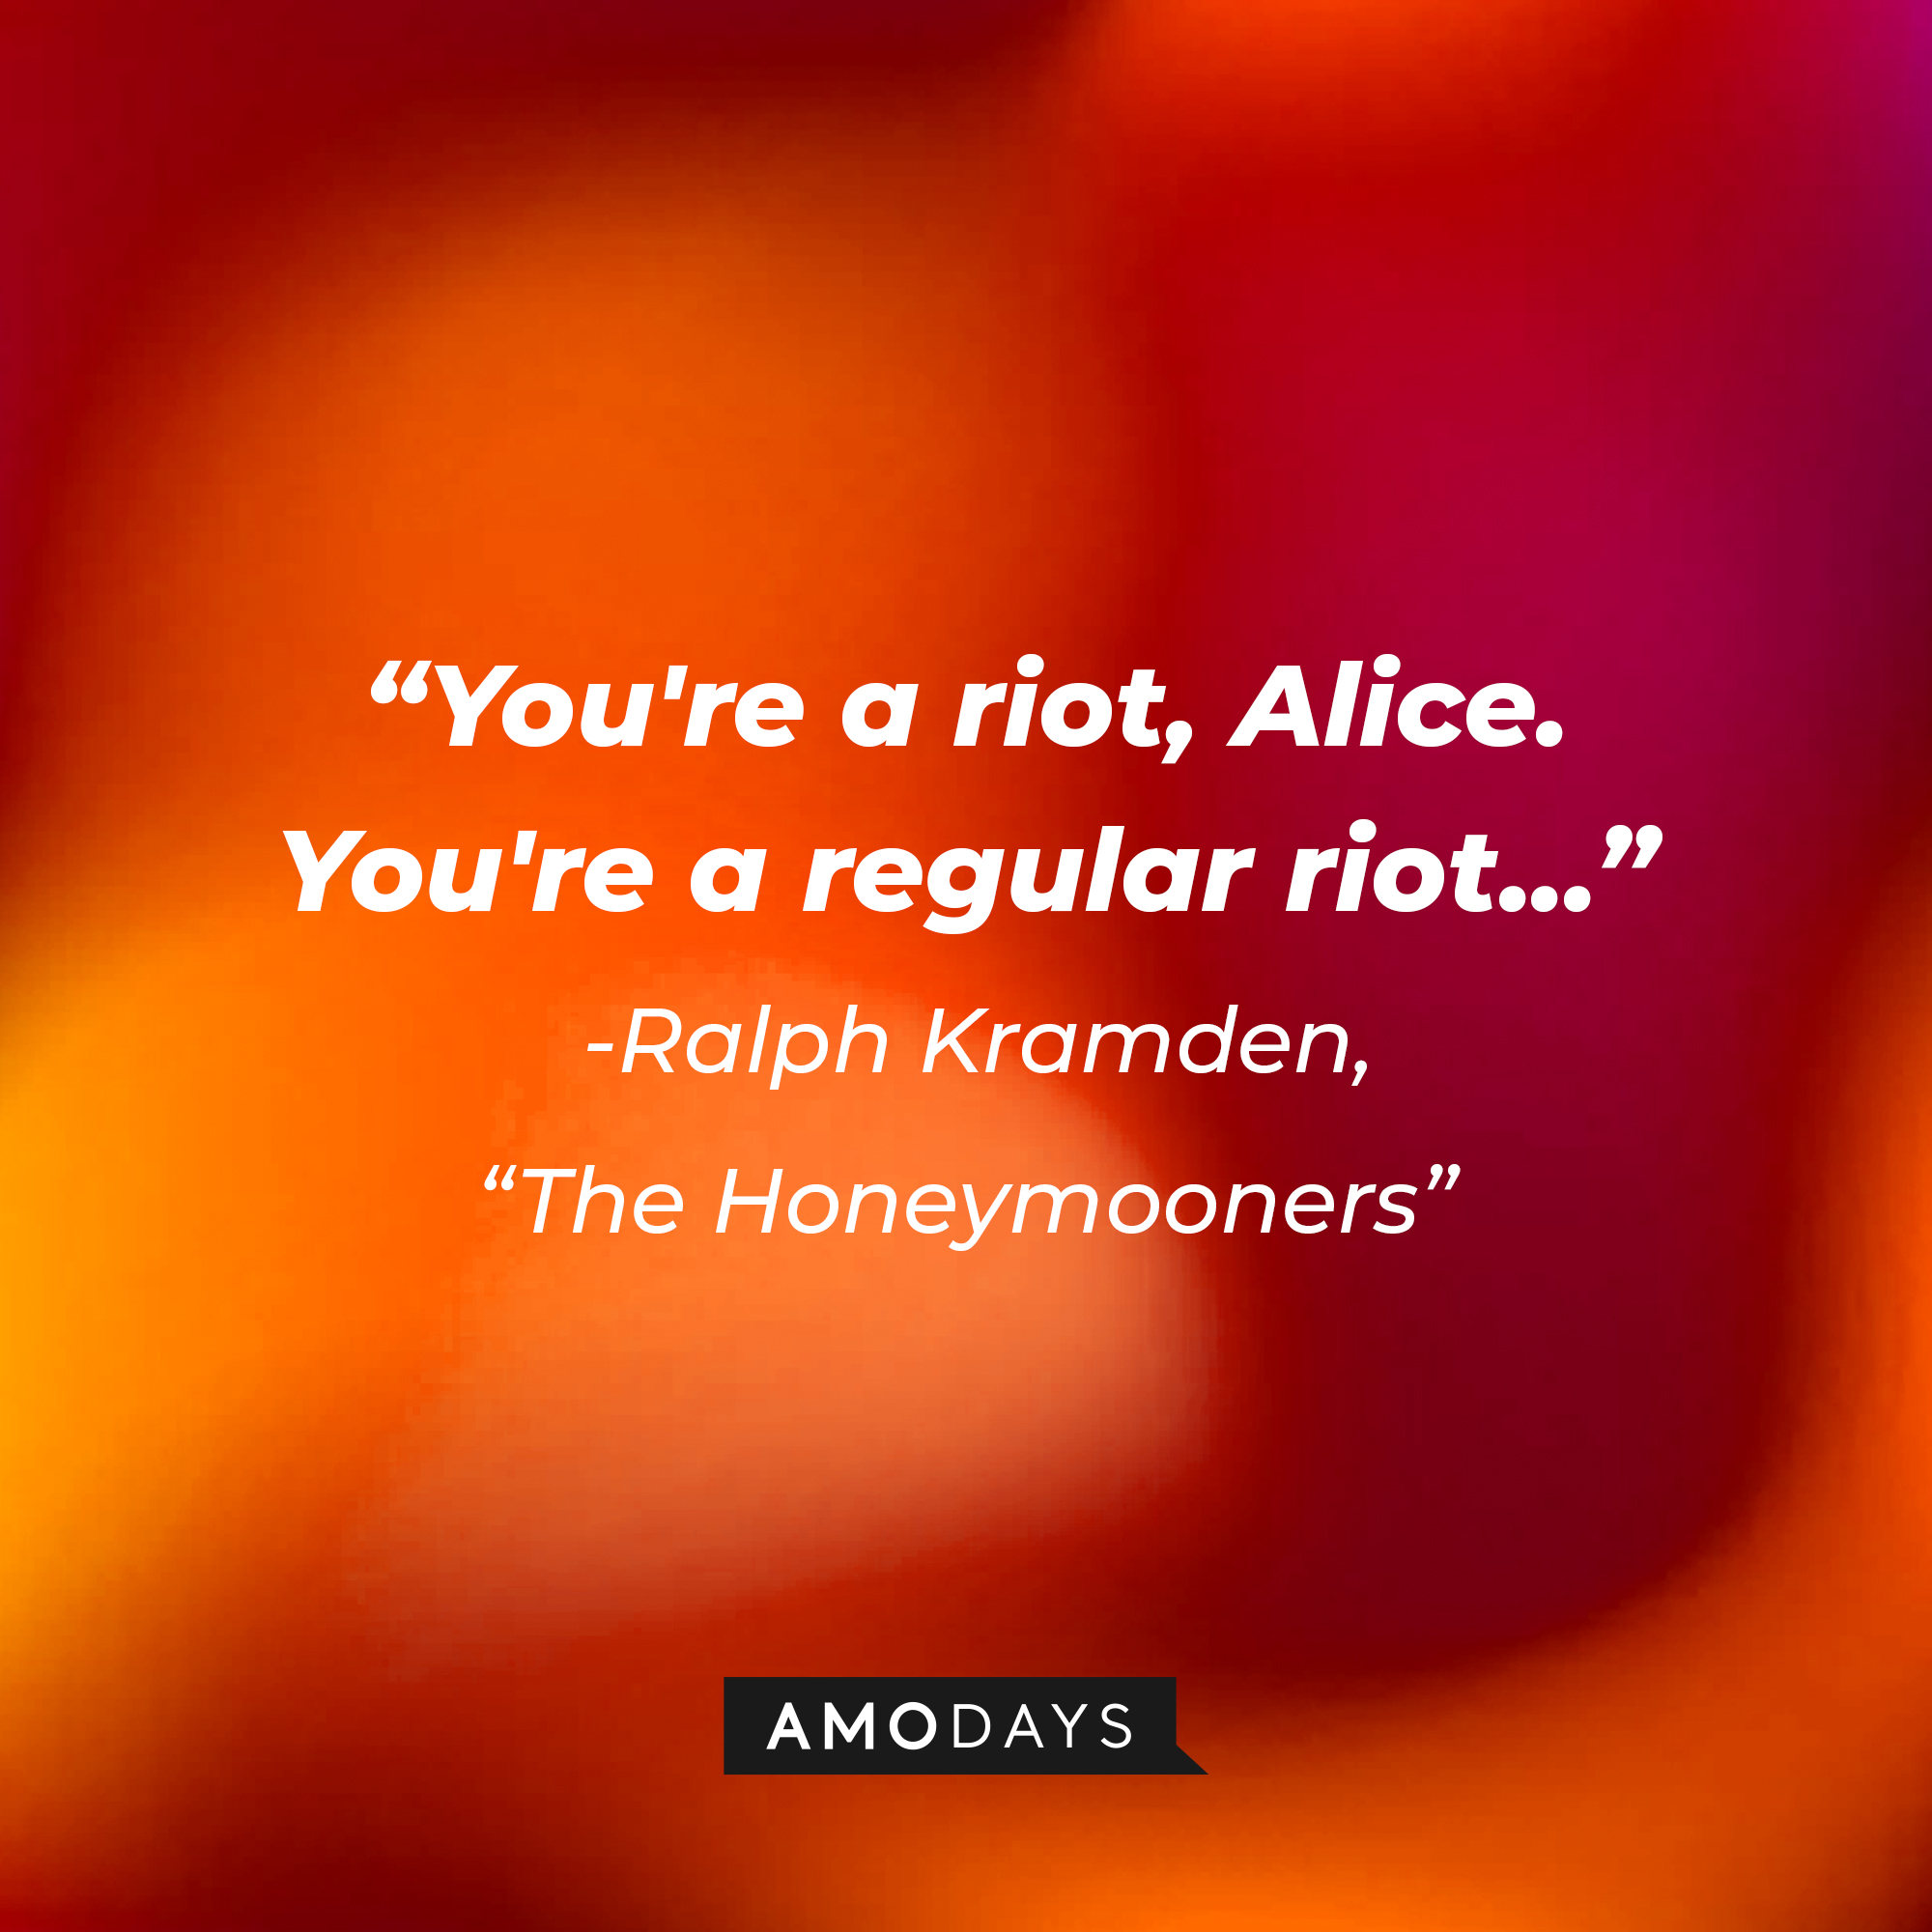 A quote from "The Honeymooners" star Ralph Kramden: "You're a riot, Alice. You're a regular riot..." | Source: AmoDays